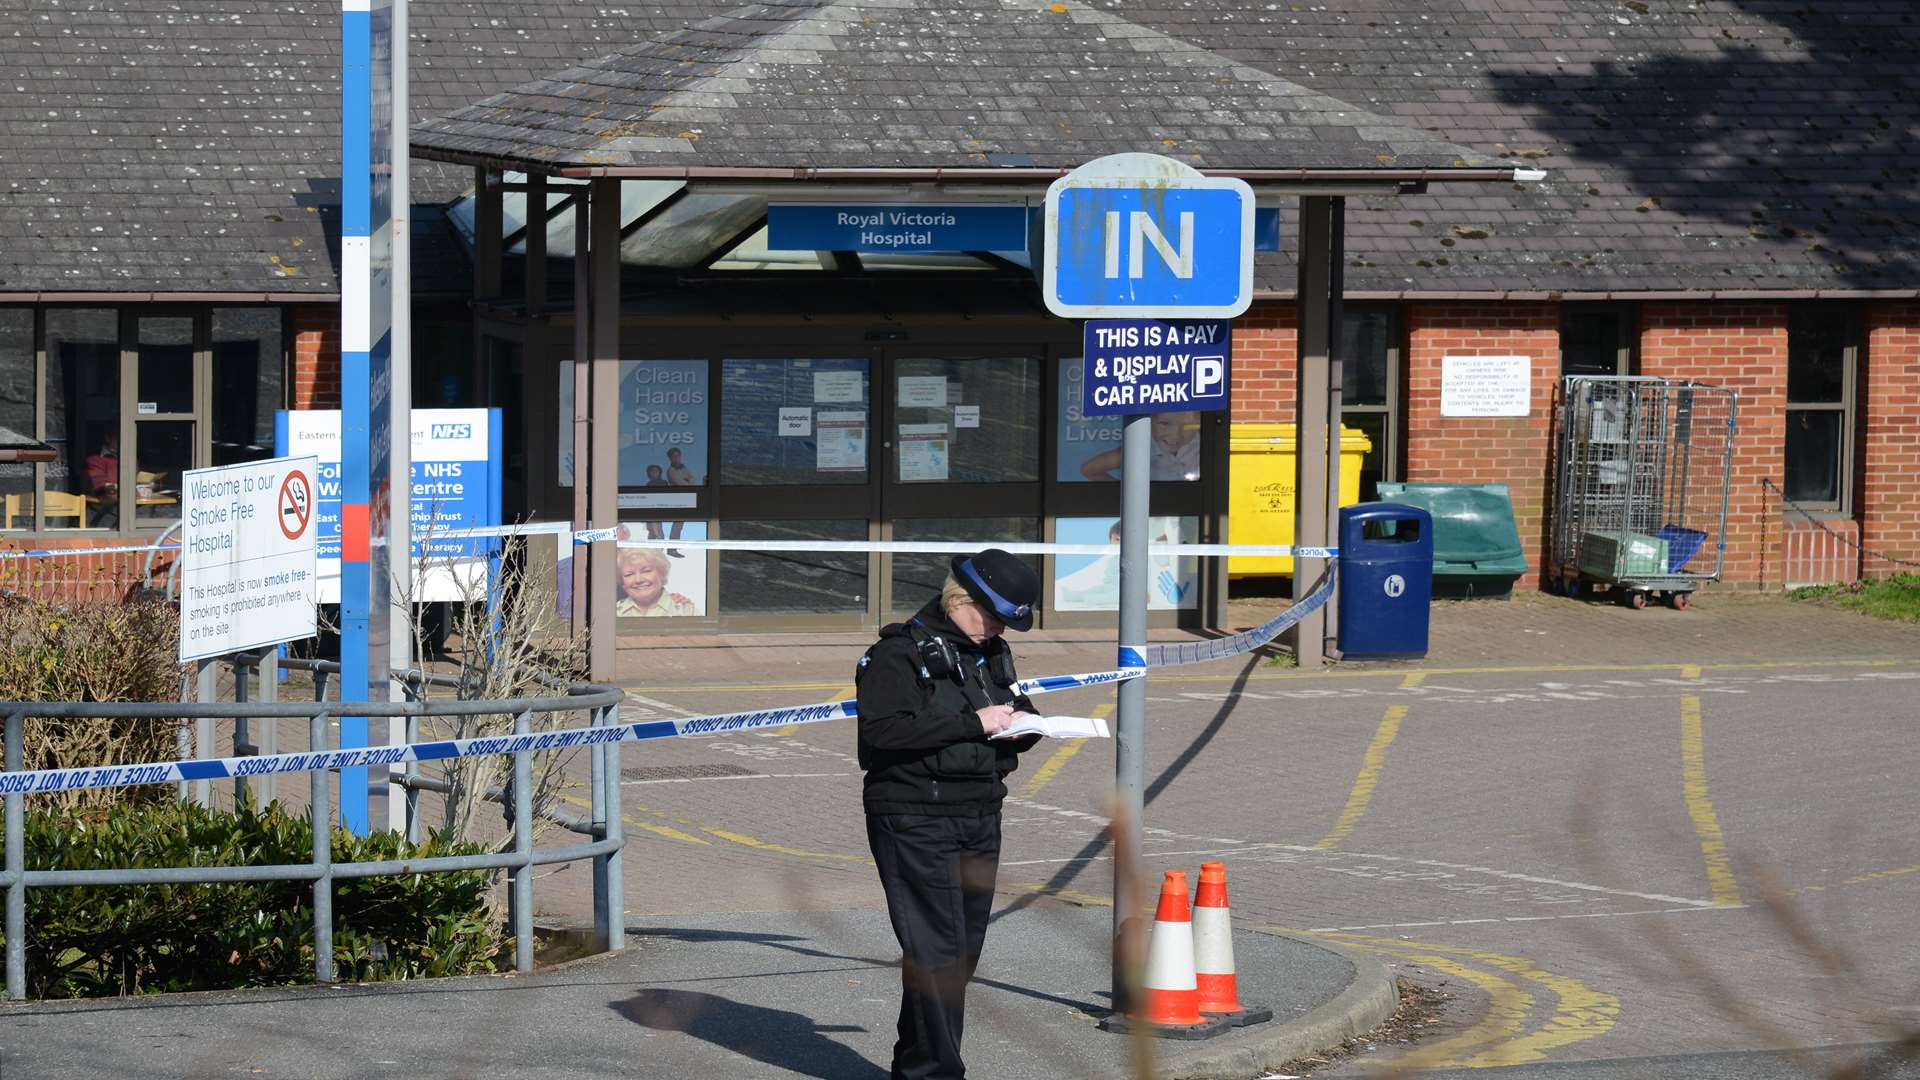 Police stood guard outside the Royal Victoria Hospital after the man dragged himself to the hospital